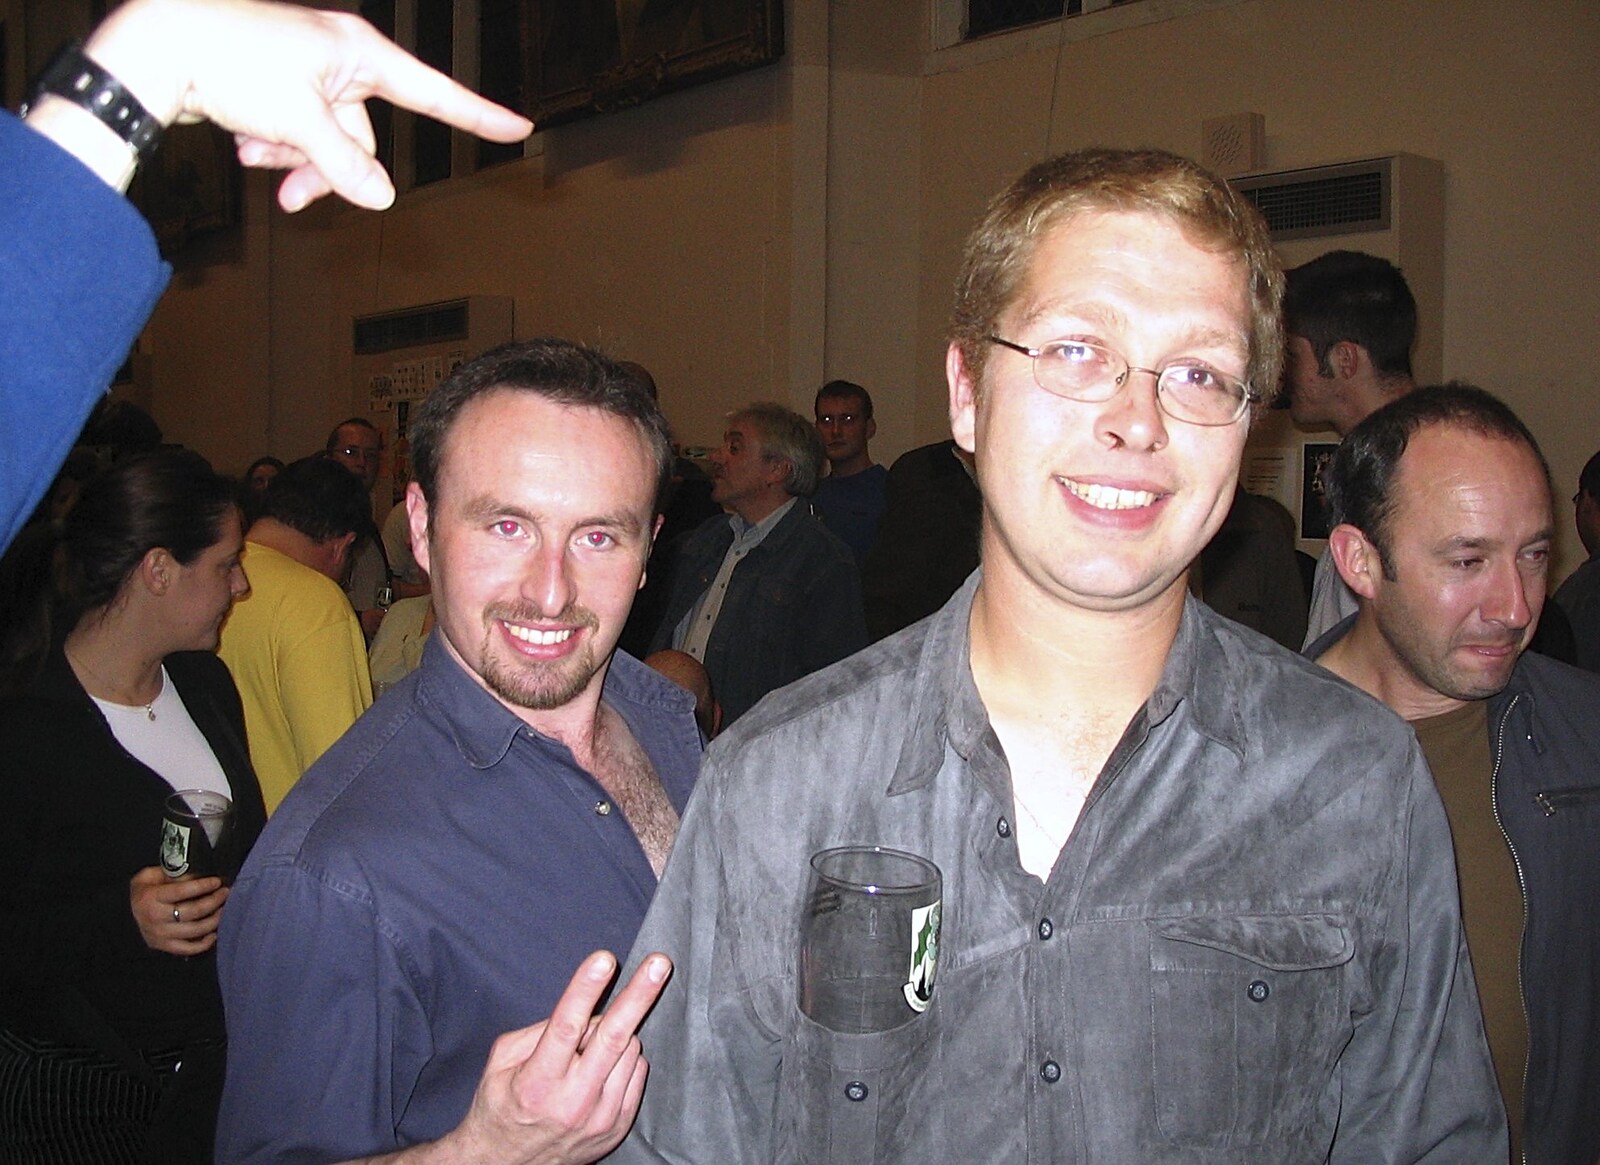 Dave and Marc from The Norfolk and Norwich Beer Festival, St. Andrew's Hall, Norwich - 27th October 2004